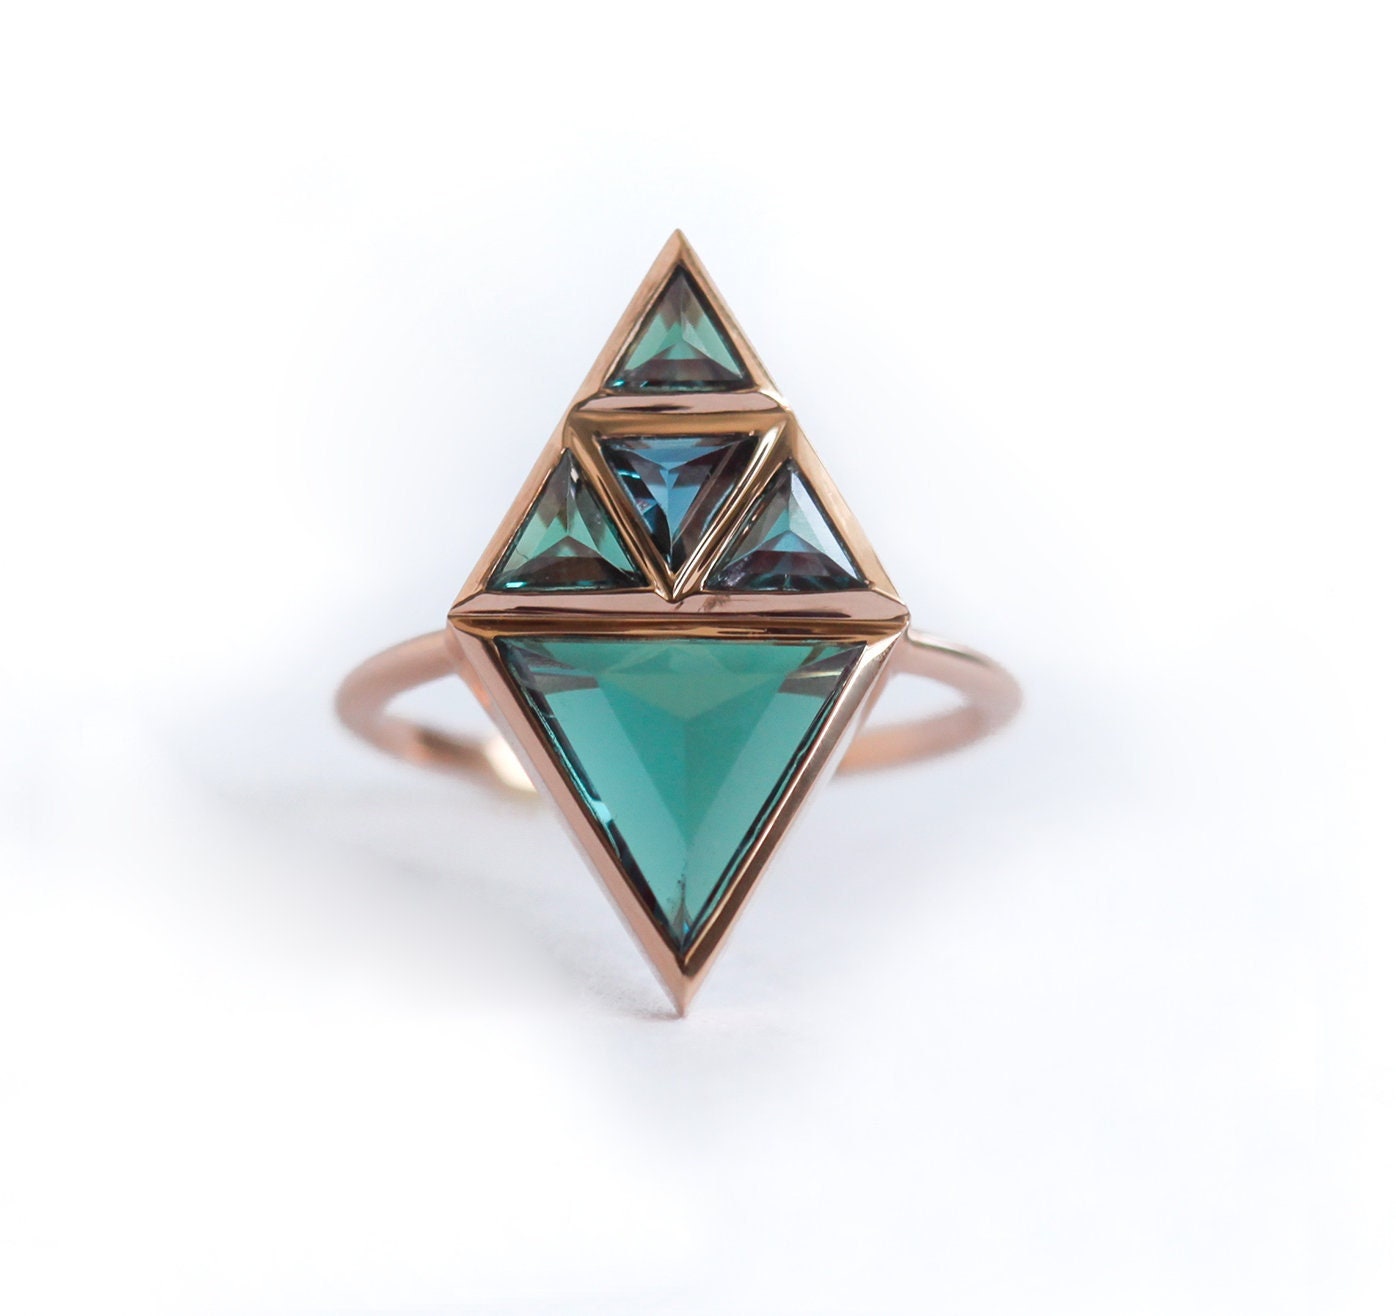 Teal Triangle Alexandrite Ring with 4 Triangle-Cut Small Alexandrites forming a Larger Triangle